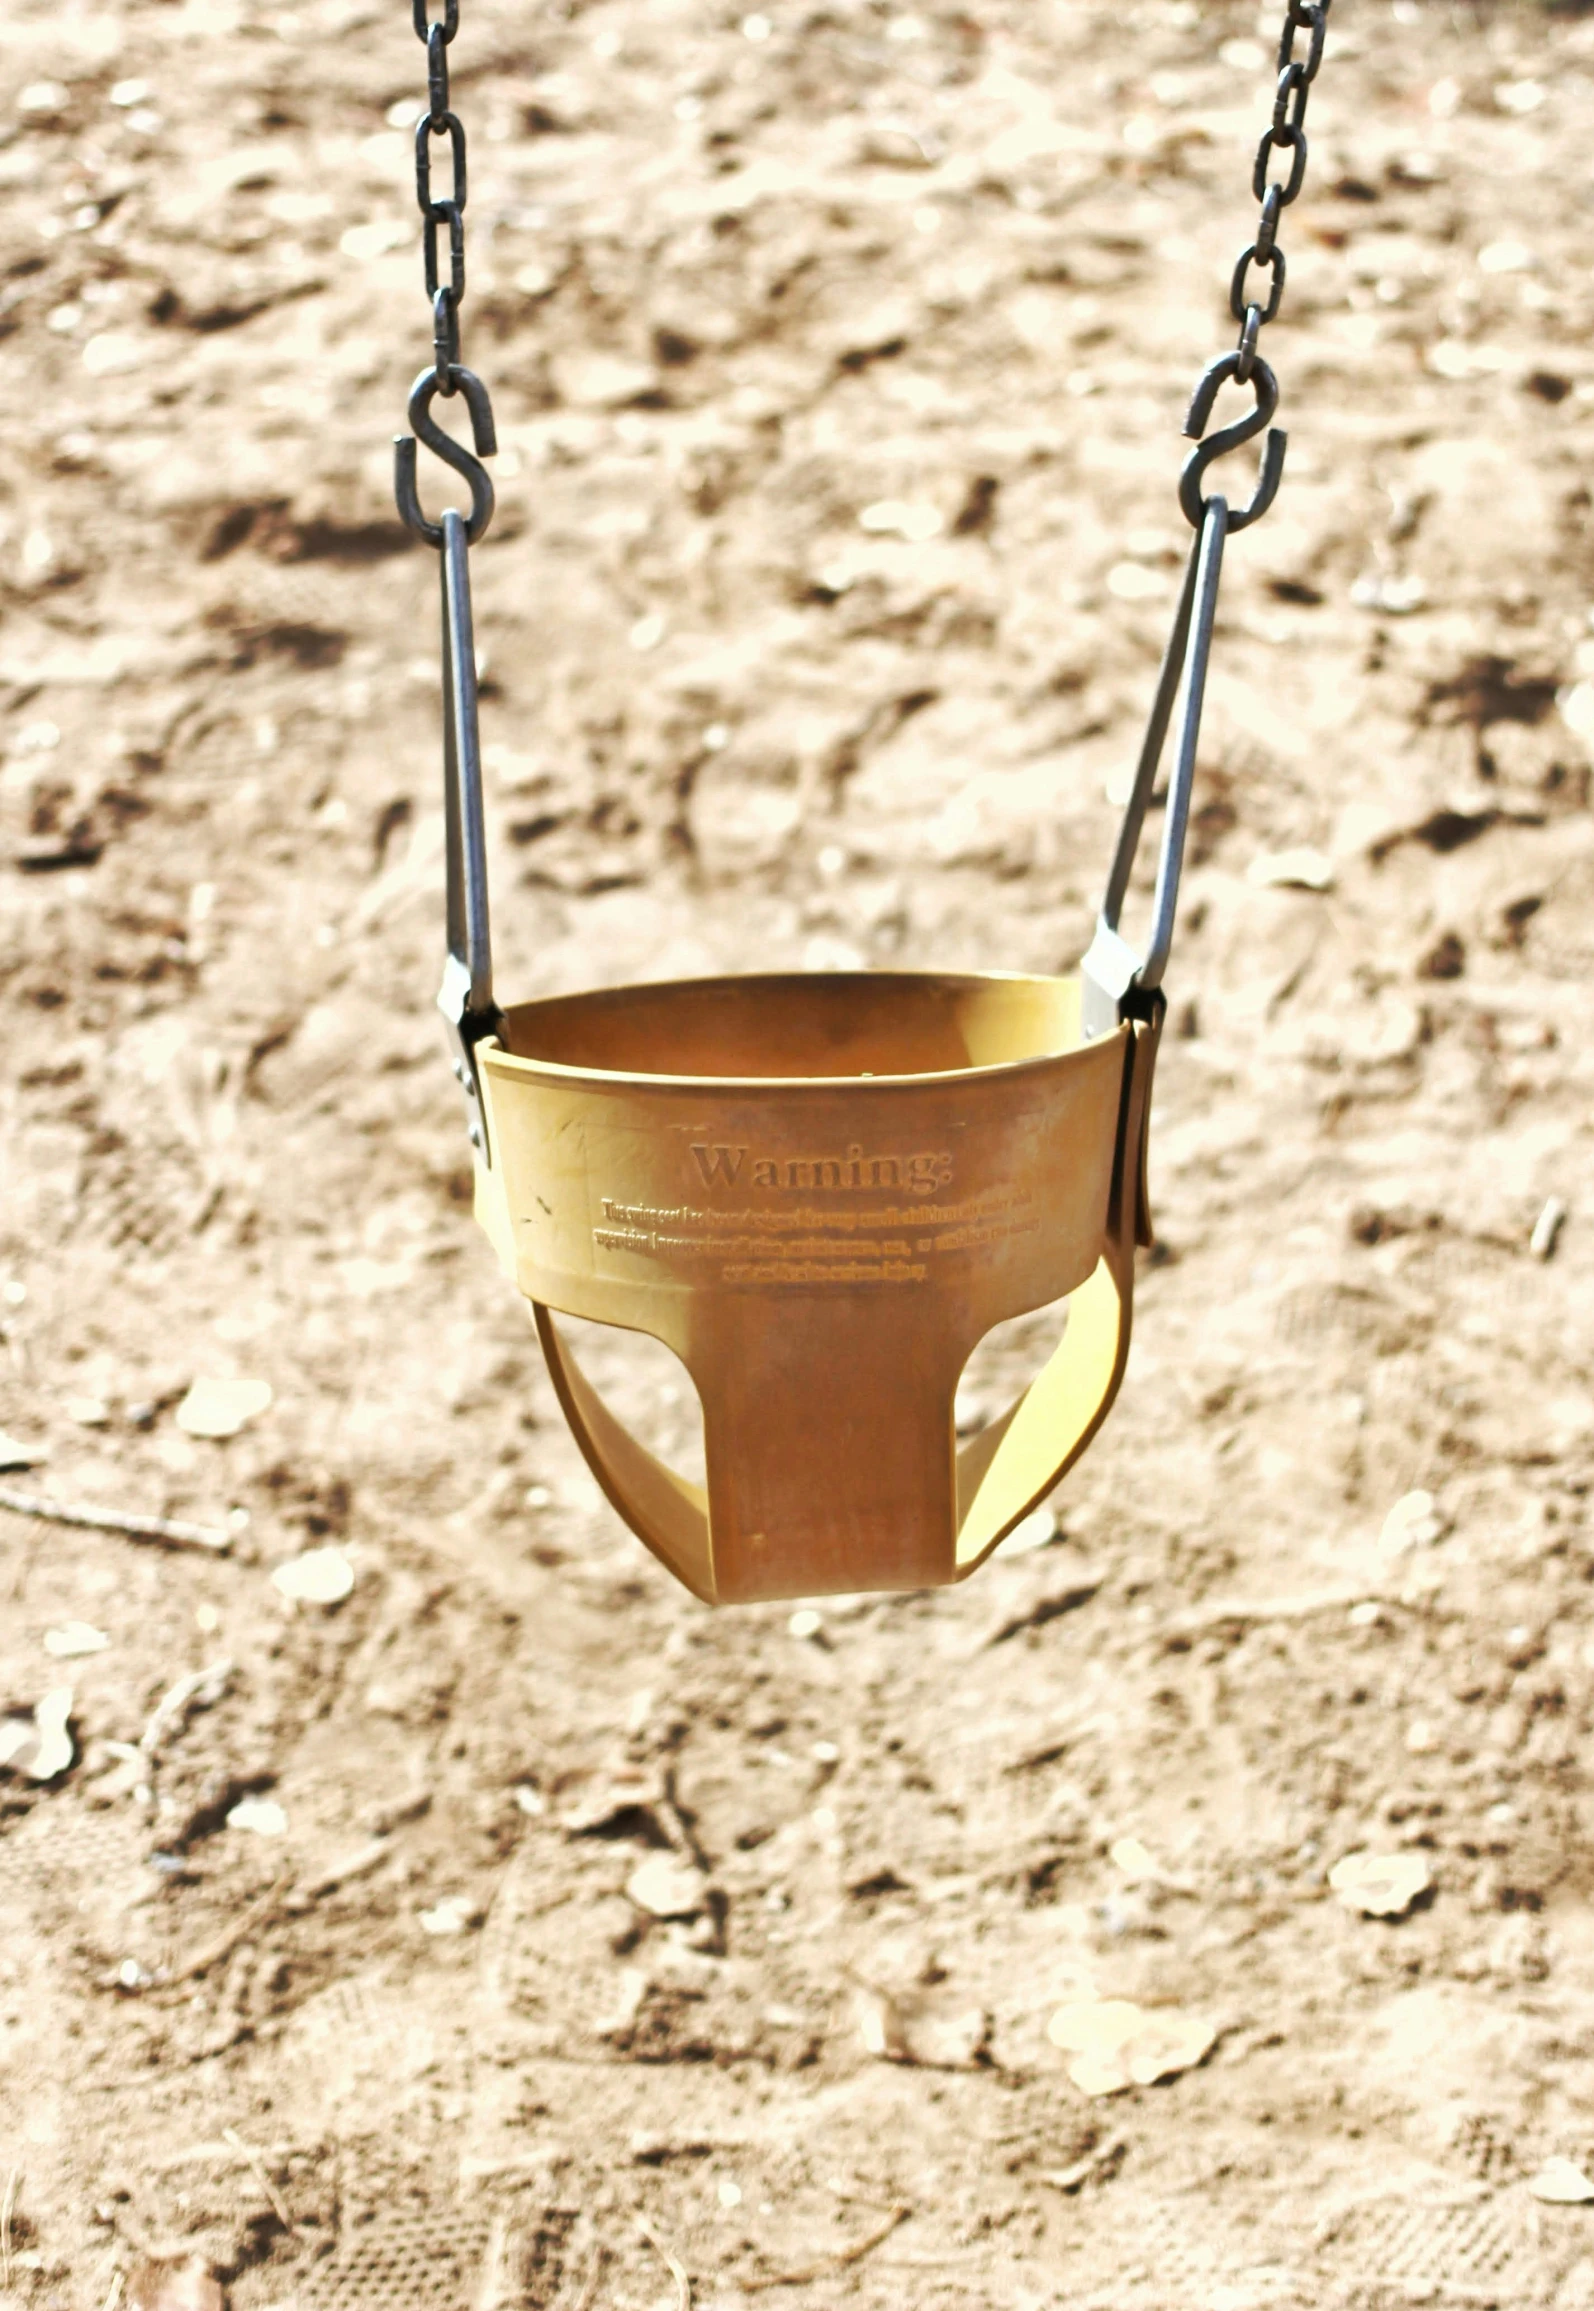 two children swings and a metal handle